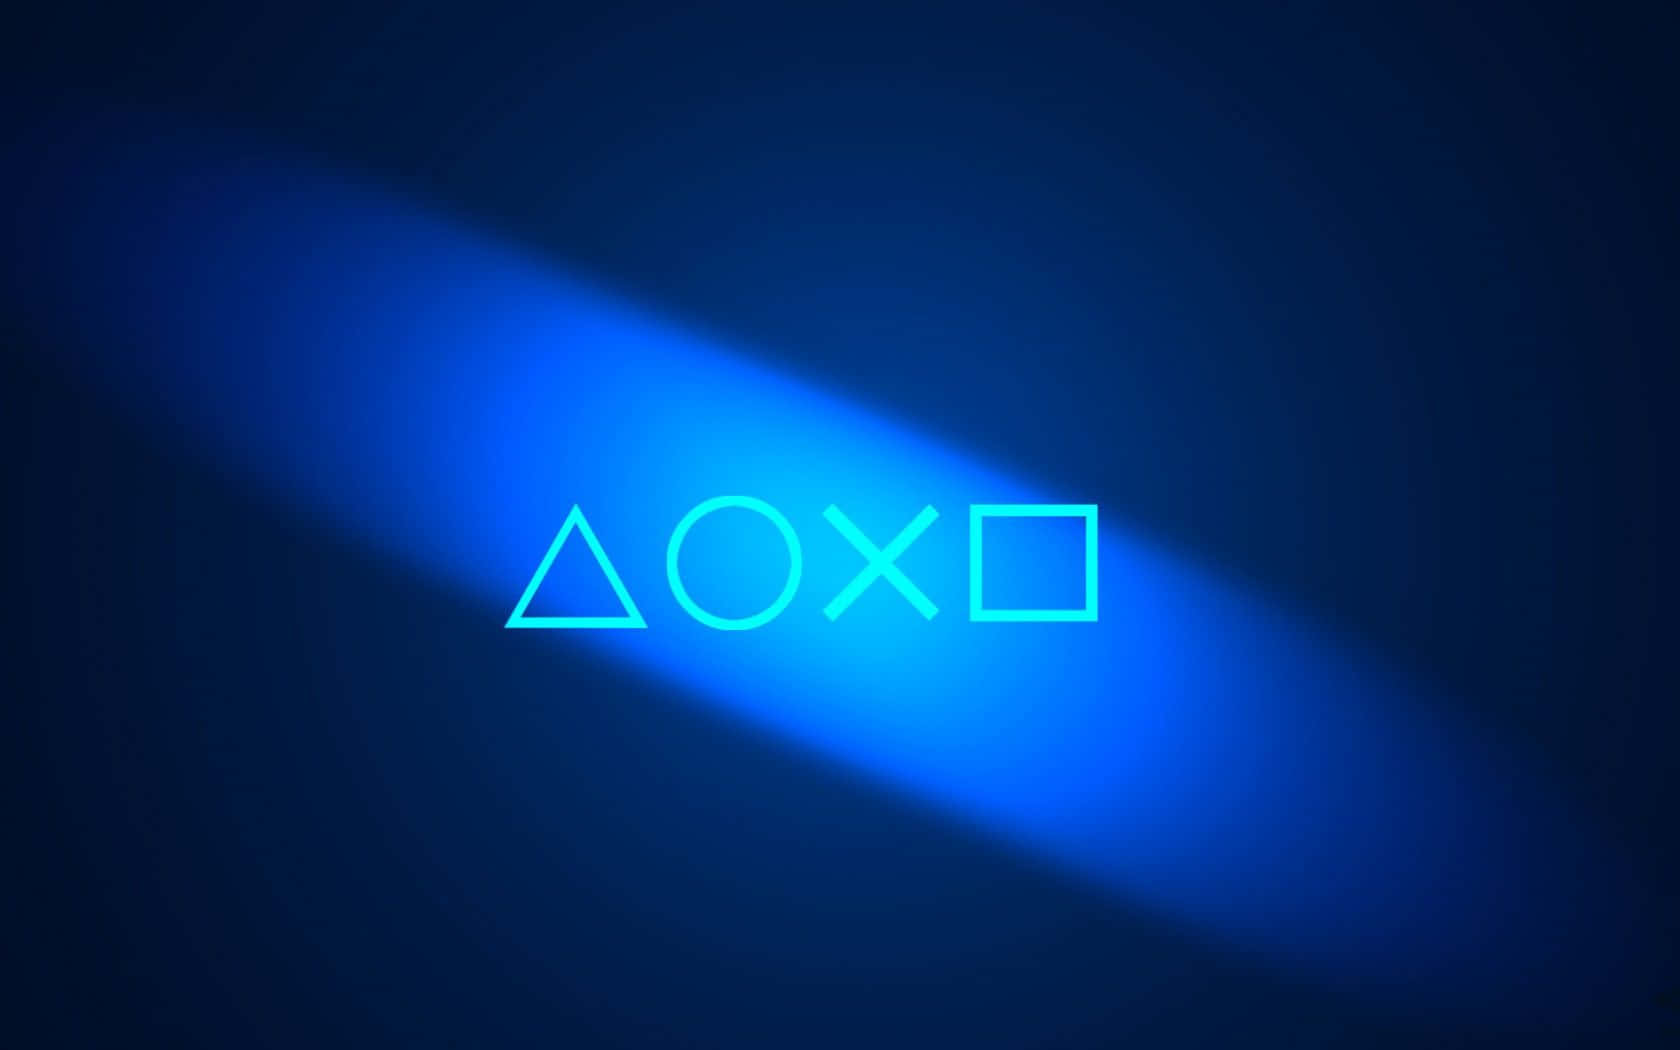 Cool Ps4 Controller Icon And Light Blue Oval Glow Wallpaper